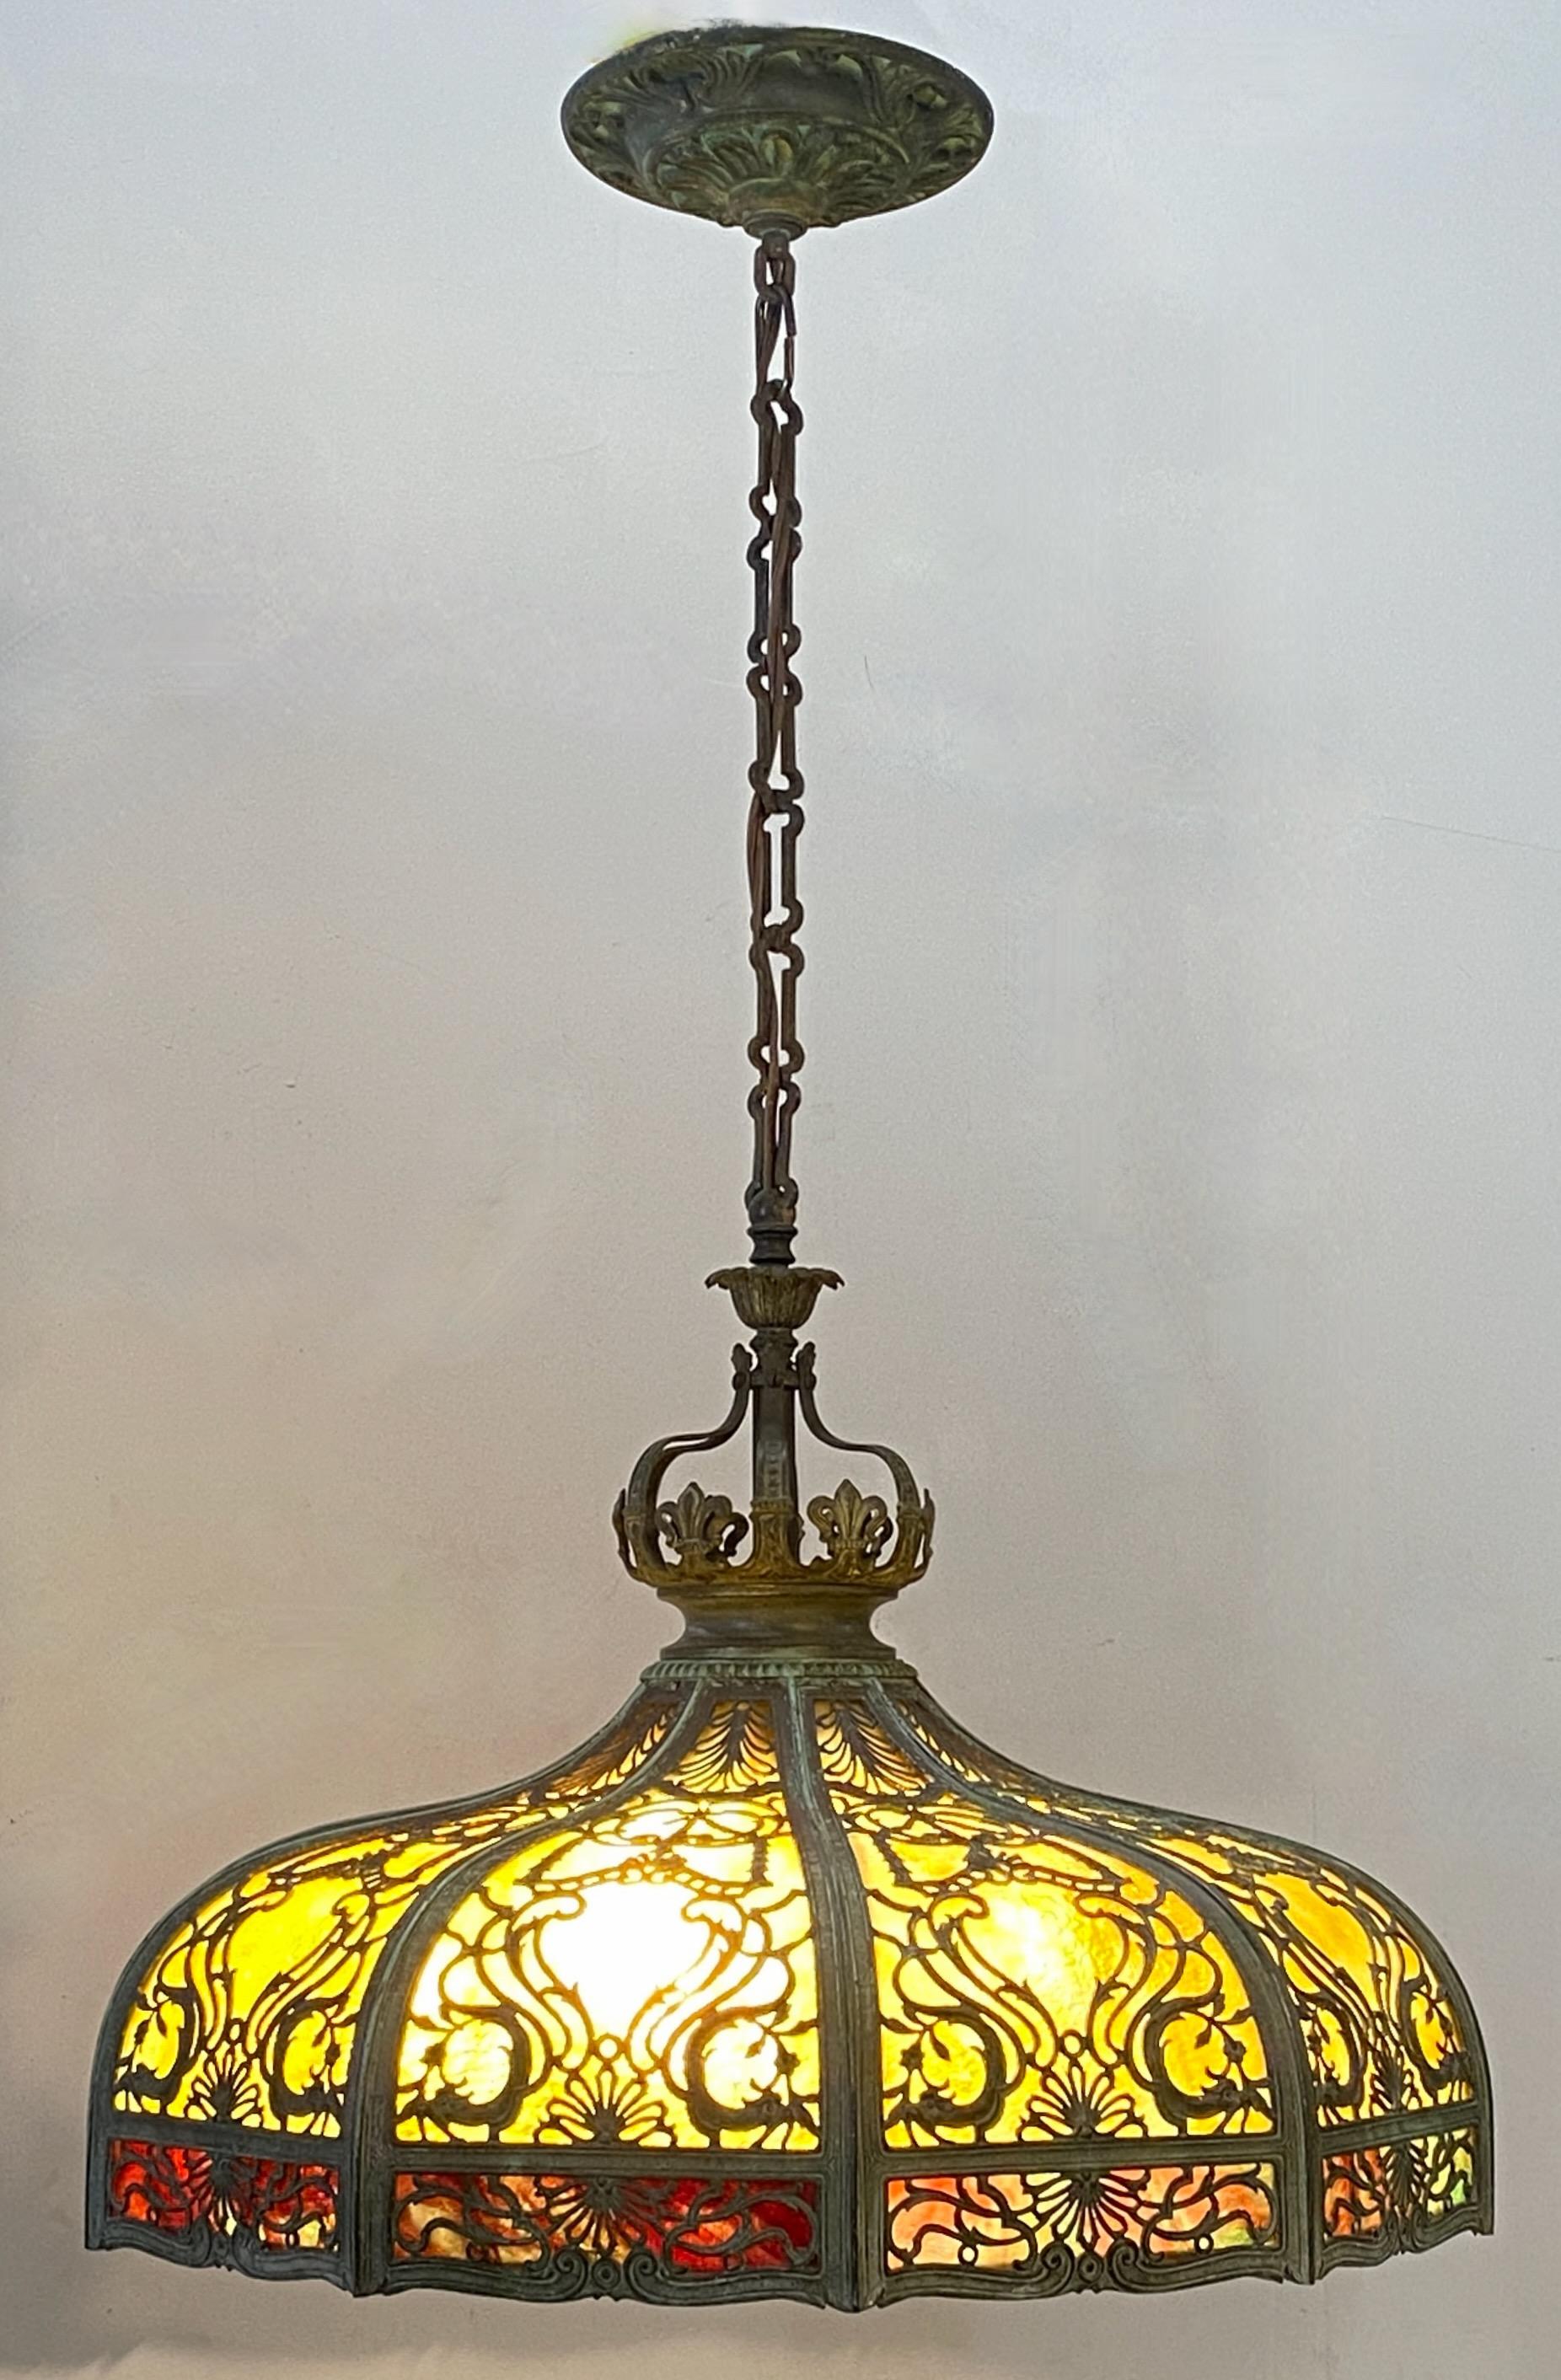 An exceptional quality large dome shape glass panel hanging pendant light fixture. In excellent original condition. Currently has the original 5 socket cluster. 
The drop with the chain and canopy measures 38 inches long. We can shorten the chain